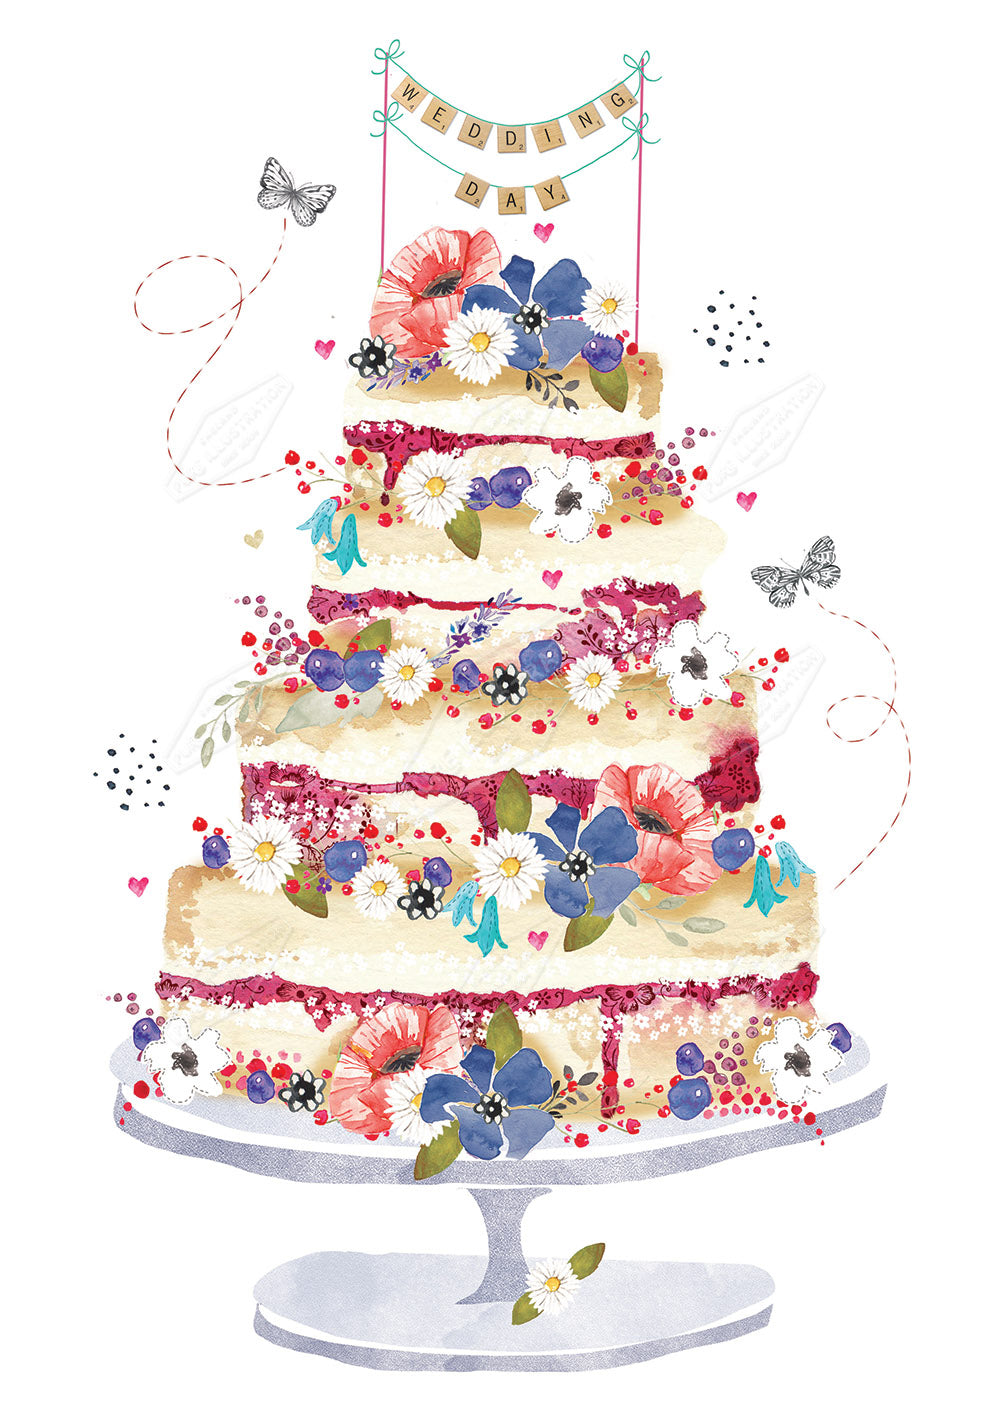 00028109EST- Emily Stalley is represented by Pure Art Licensing Agency - Wedding Greeting Card Design